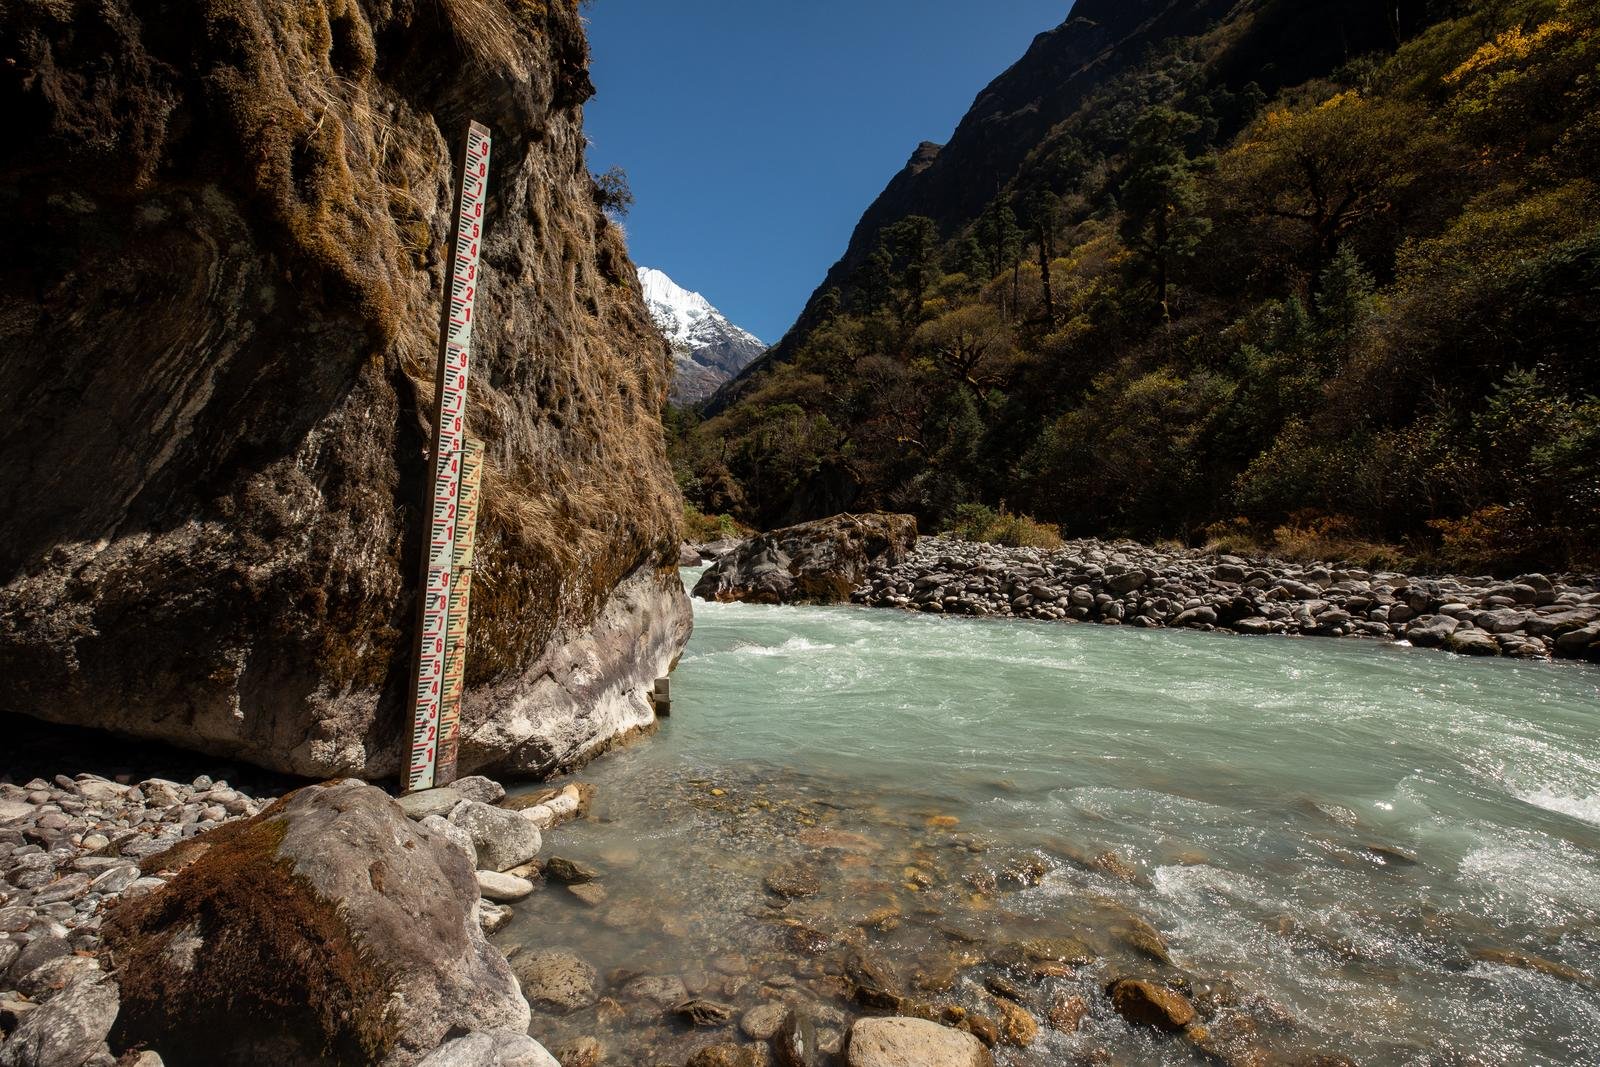  The work is so time-consuming and remote that scientists  haven’t even mapped out where all the potentially dangerous lakes are,  let alone figured out when those lakes might release their&nbsp;water.  But scientists in Nepal have had some success b